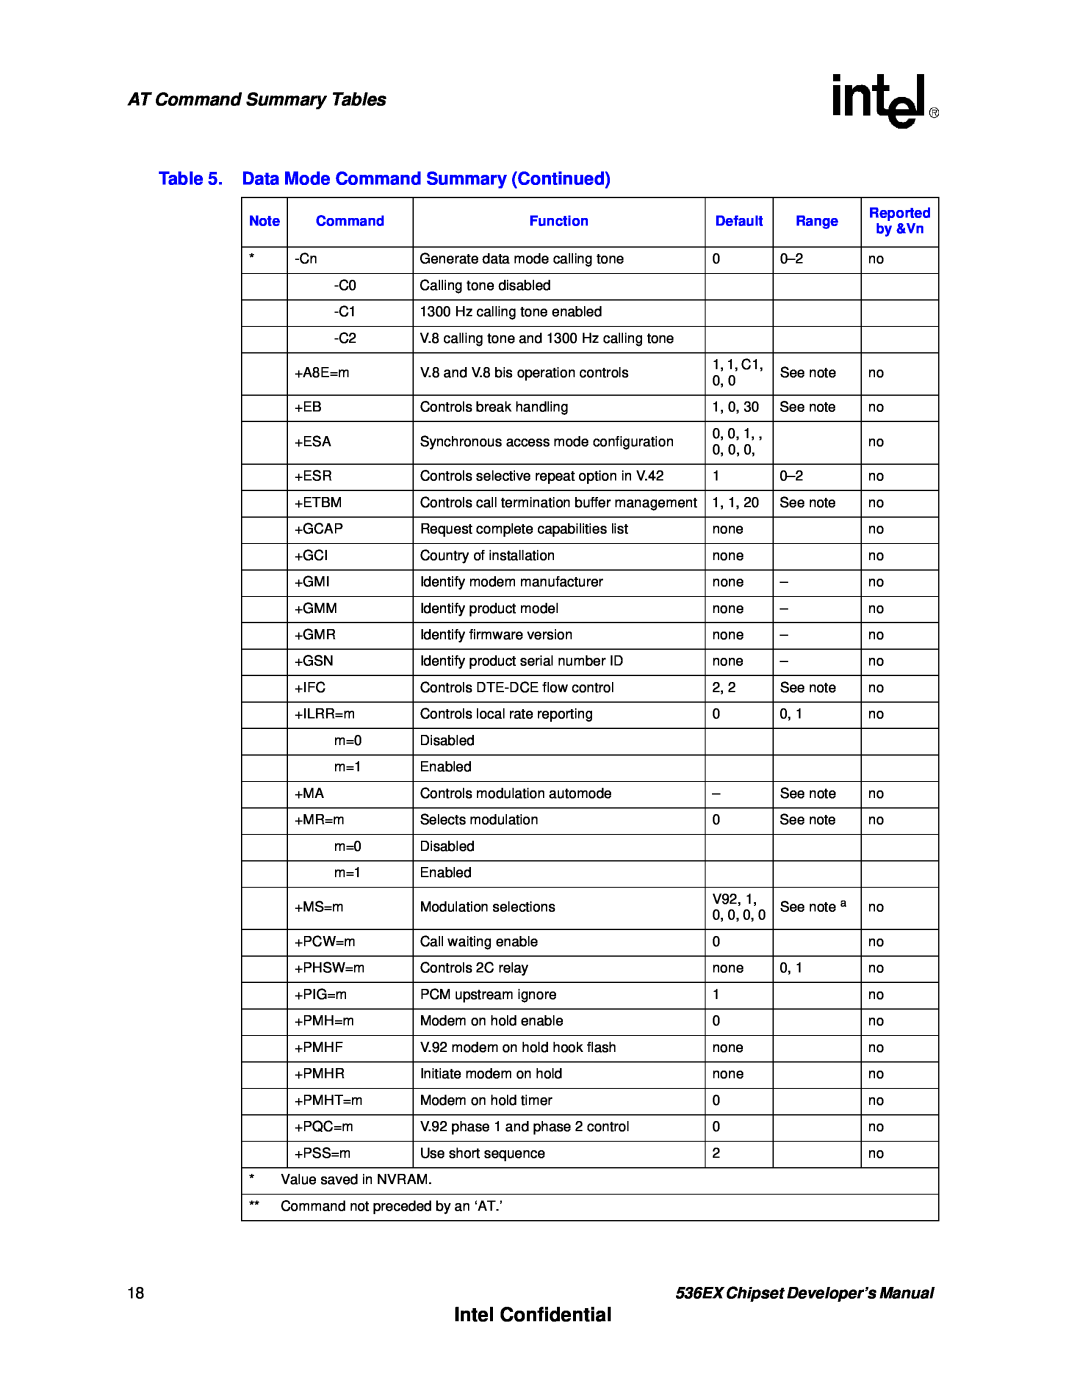 Intel 537EX manual Intel Confidential, AT Command Summary Tables, Data Mode Command Summary Continued 